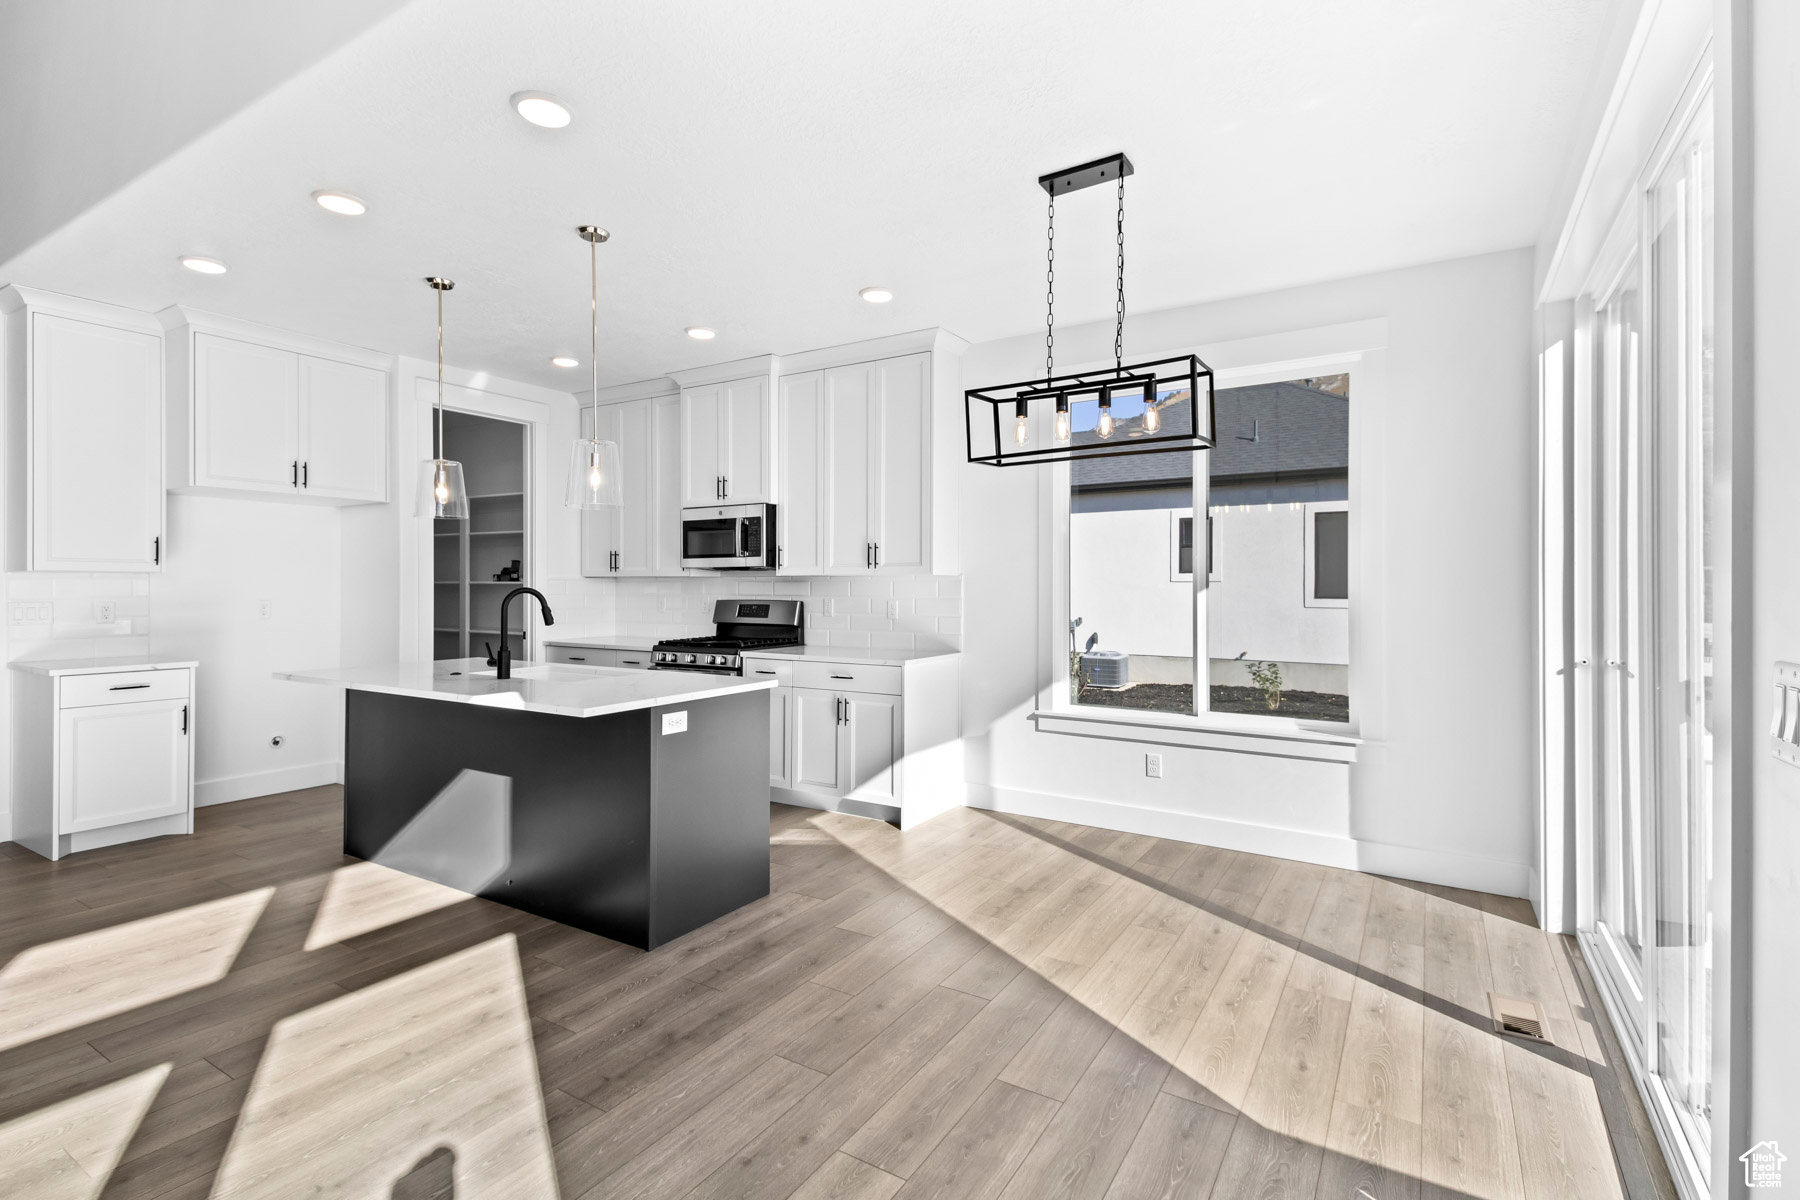 Kitchen featuring a kitchen island with sink, hanging light fixtures, light hardwood / wood-style flooring, white cabinetry, and appliances with stainless steel finishes